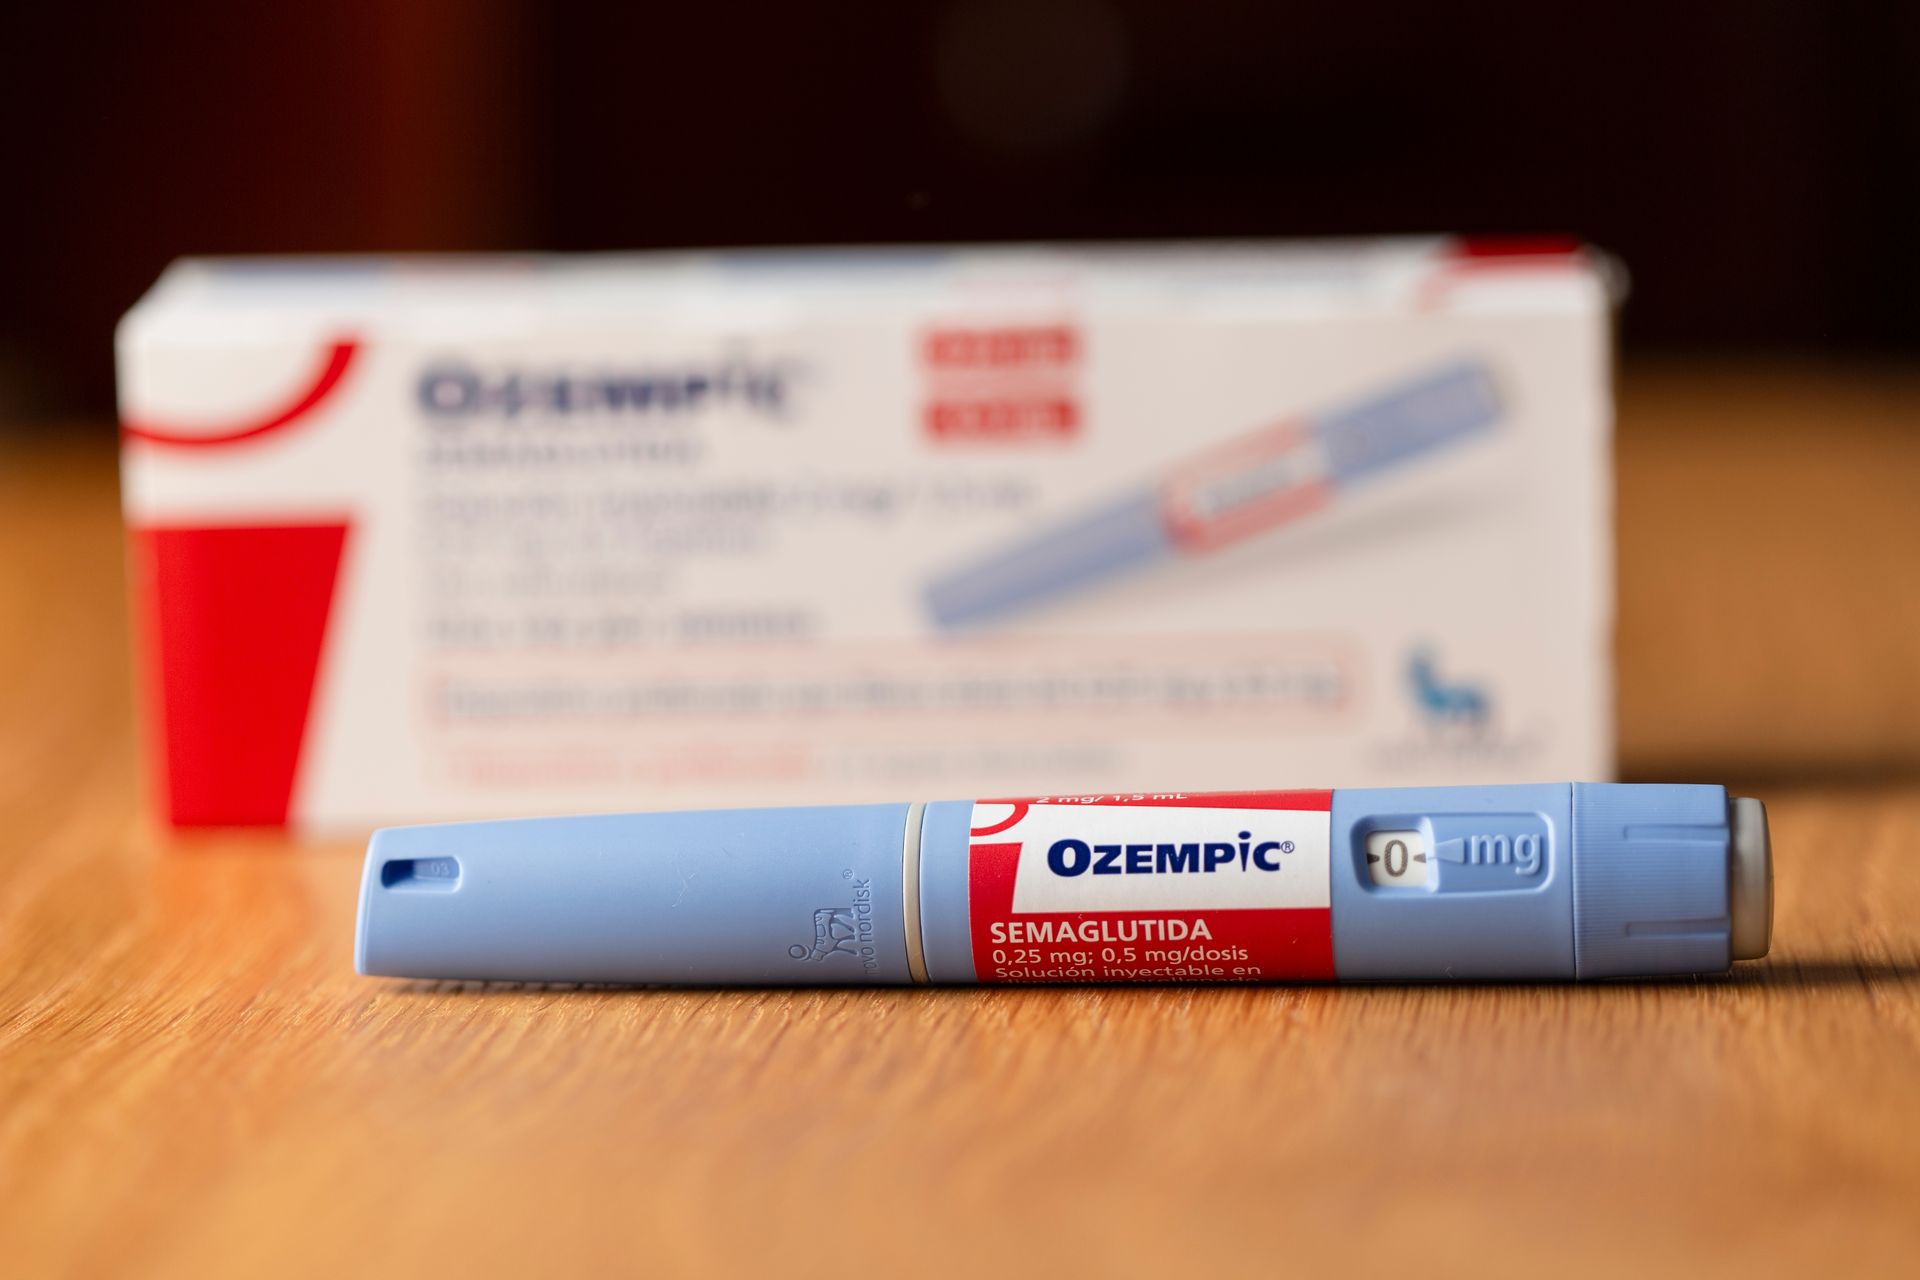 An Ozempic injection pen